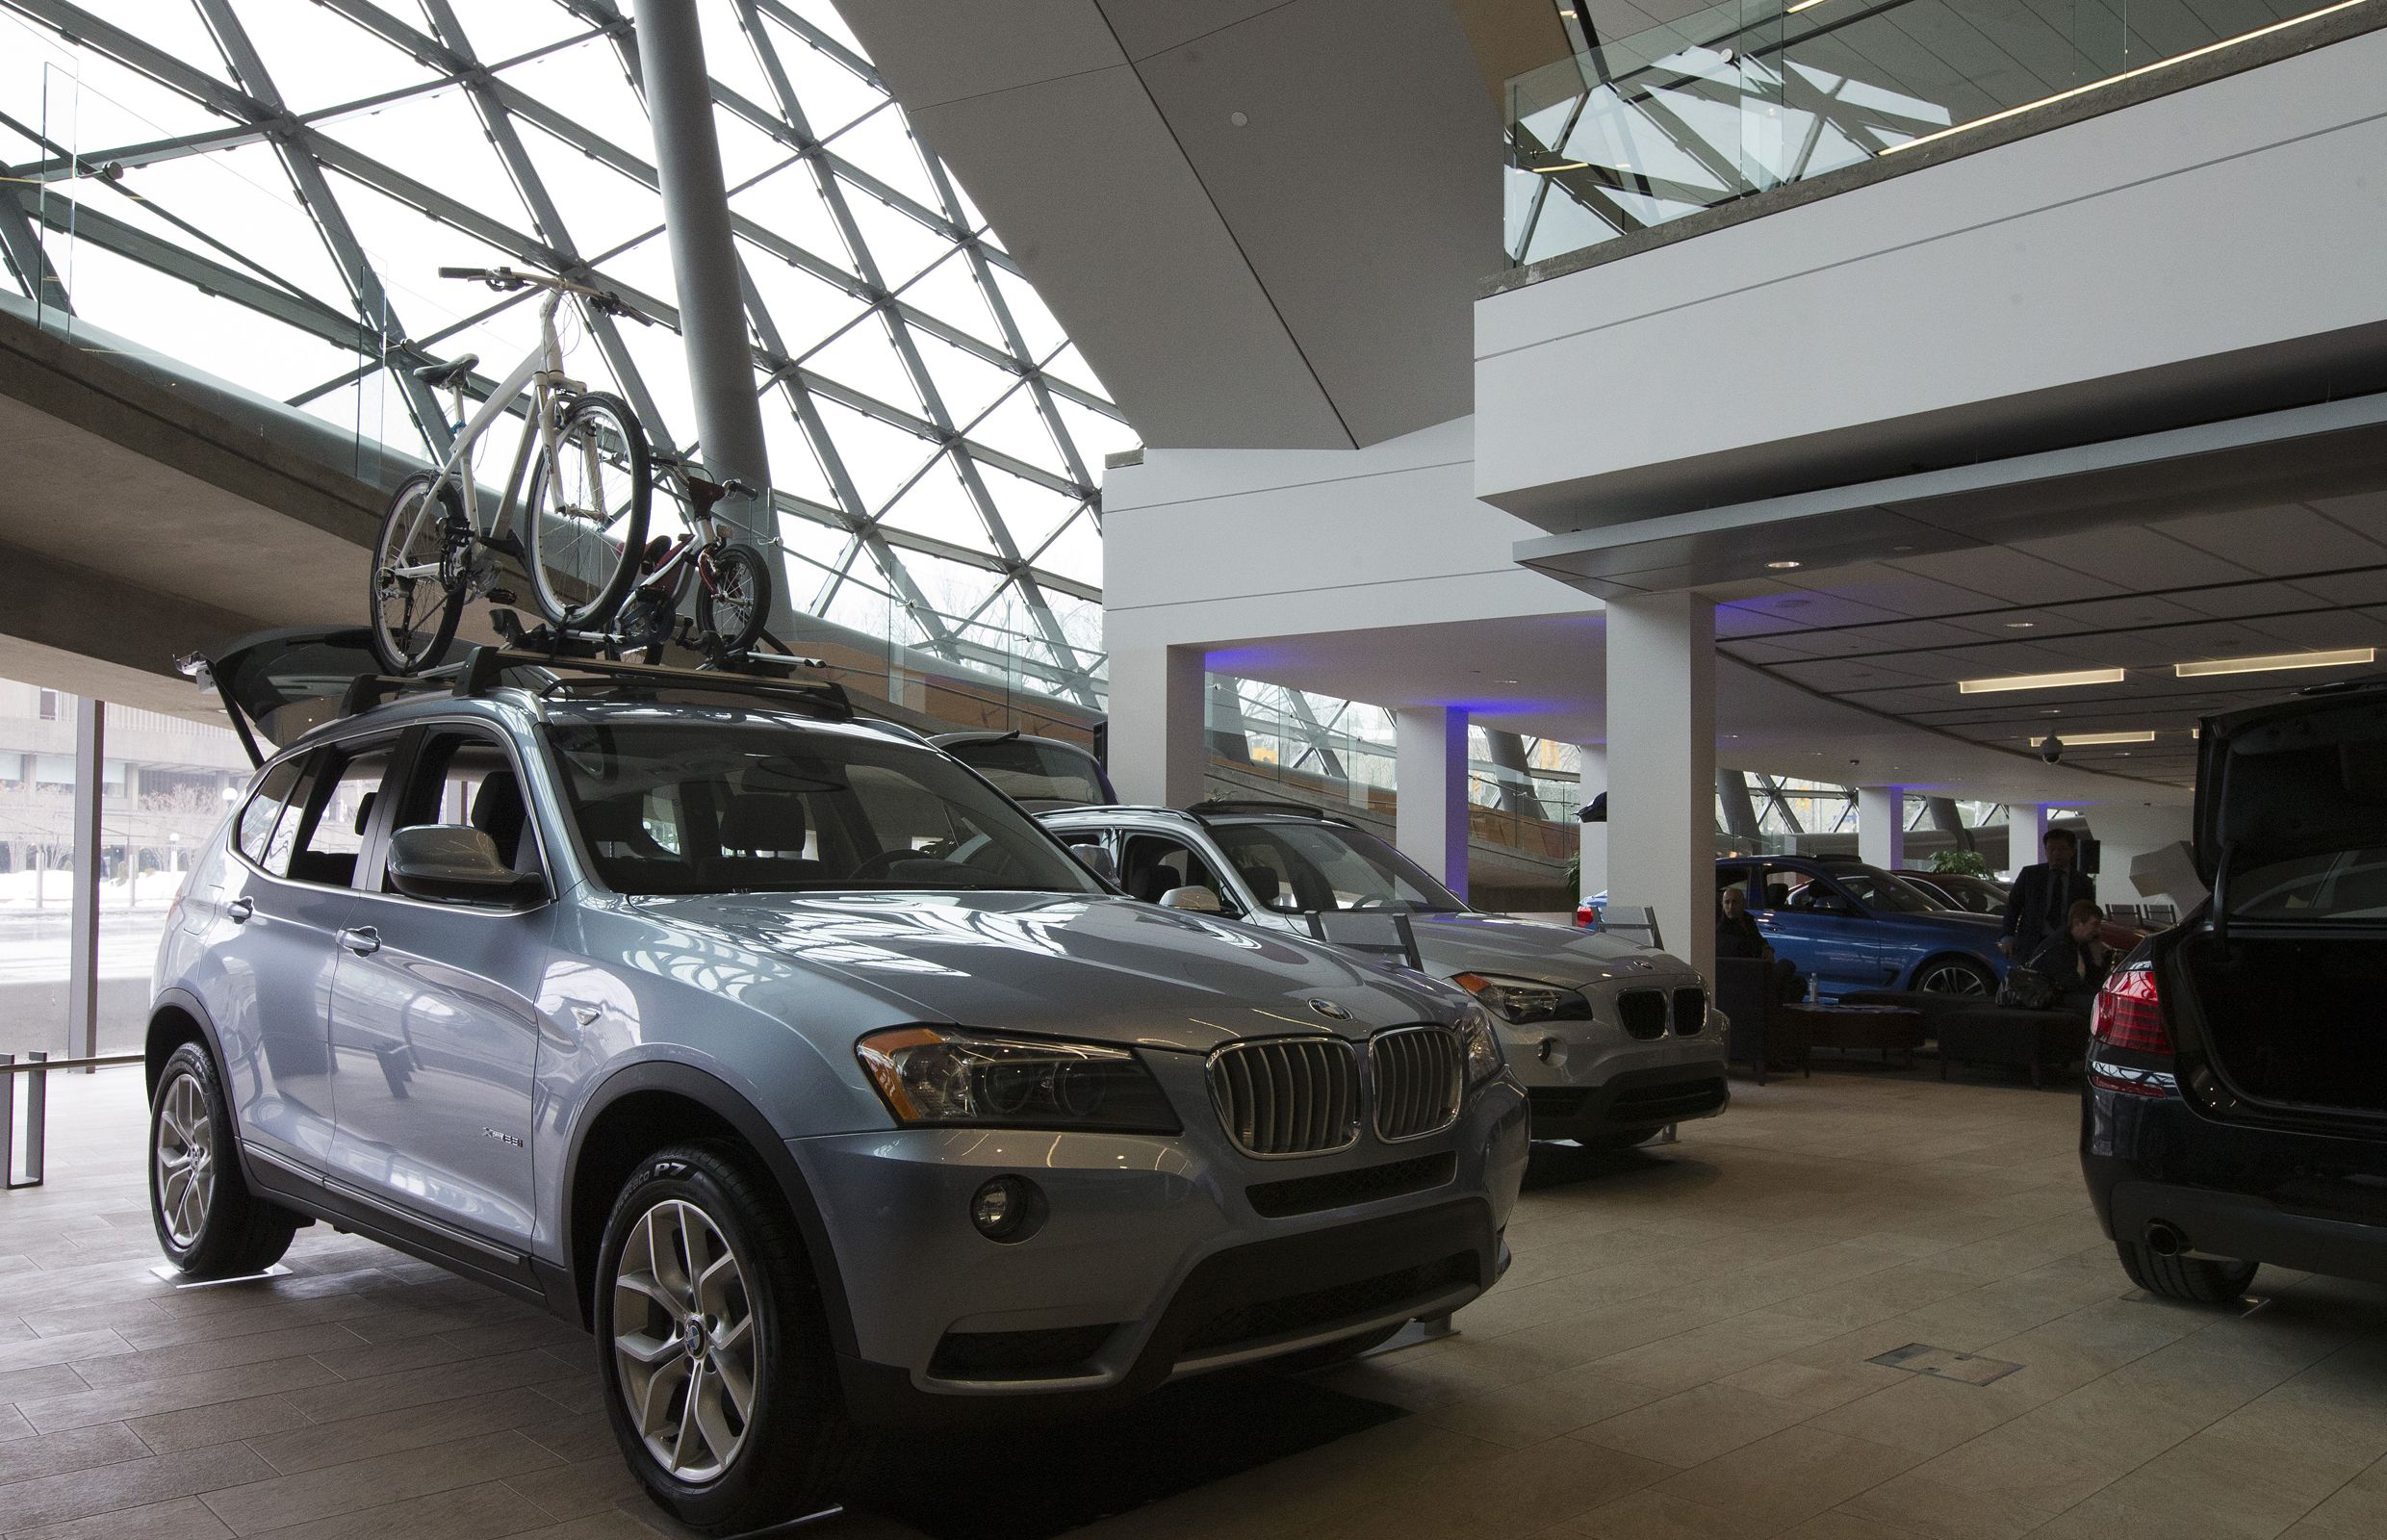 Ottawa Auto Show Special attractions to see Driving